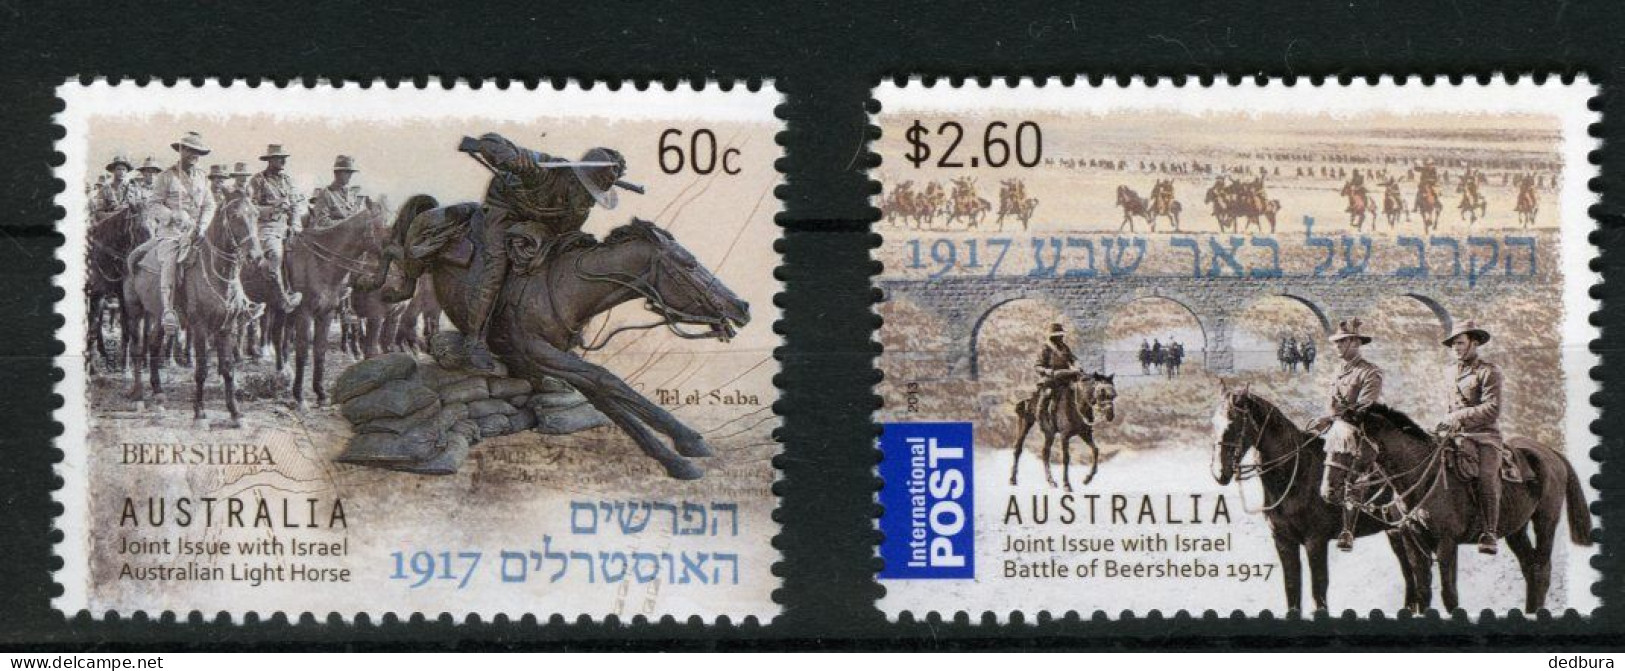 Australia-Israel Joint Issue 2013 - Battle Of Beersheba, 2 Complete Stamp Sets. Israel Stamps Without Tabs - Unused Stamps (without Tabs)